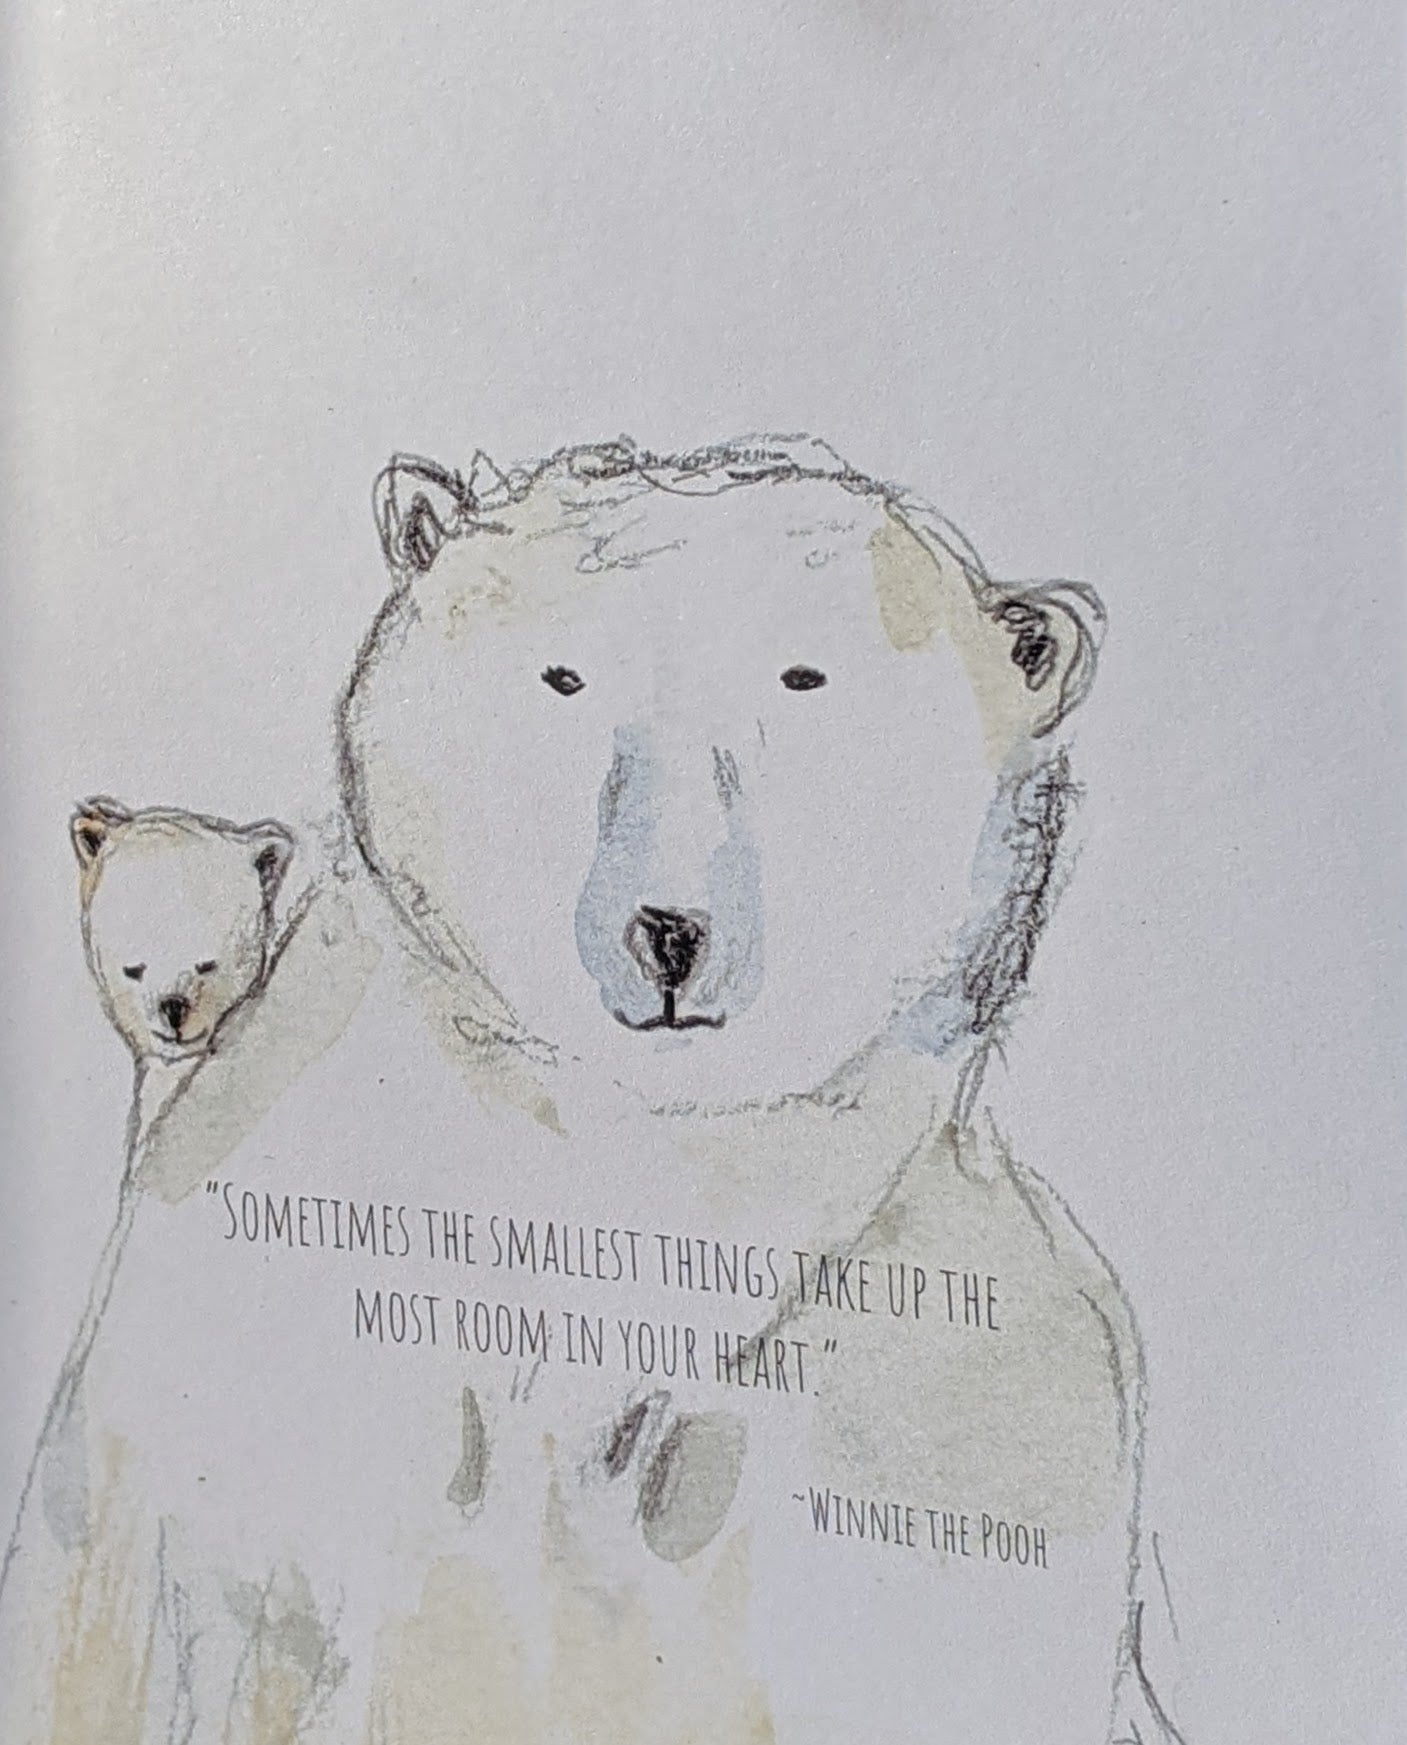 Polar bears Mother's day & birthday greeting card, Winnie the Pooh quote, love